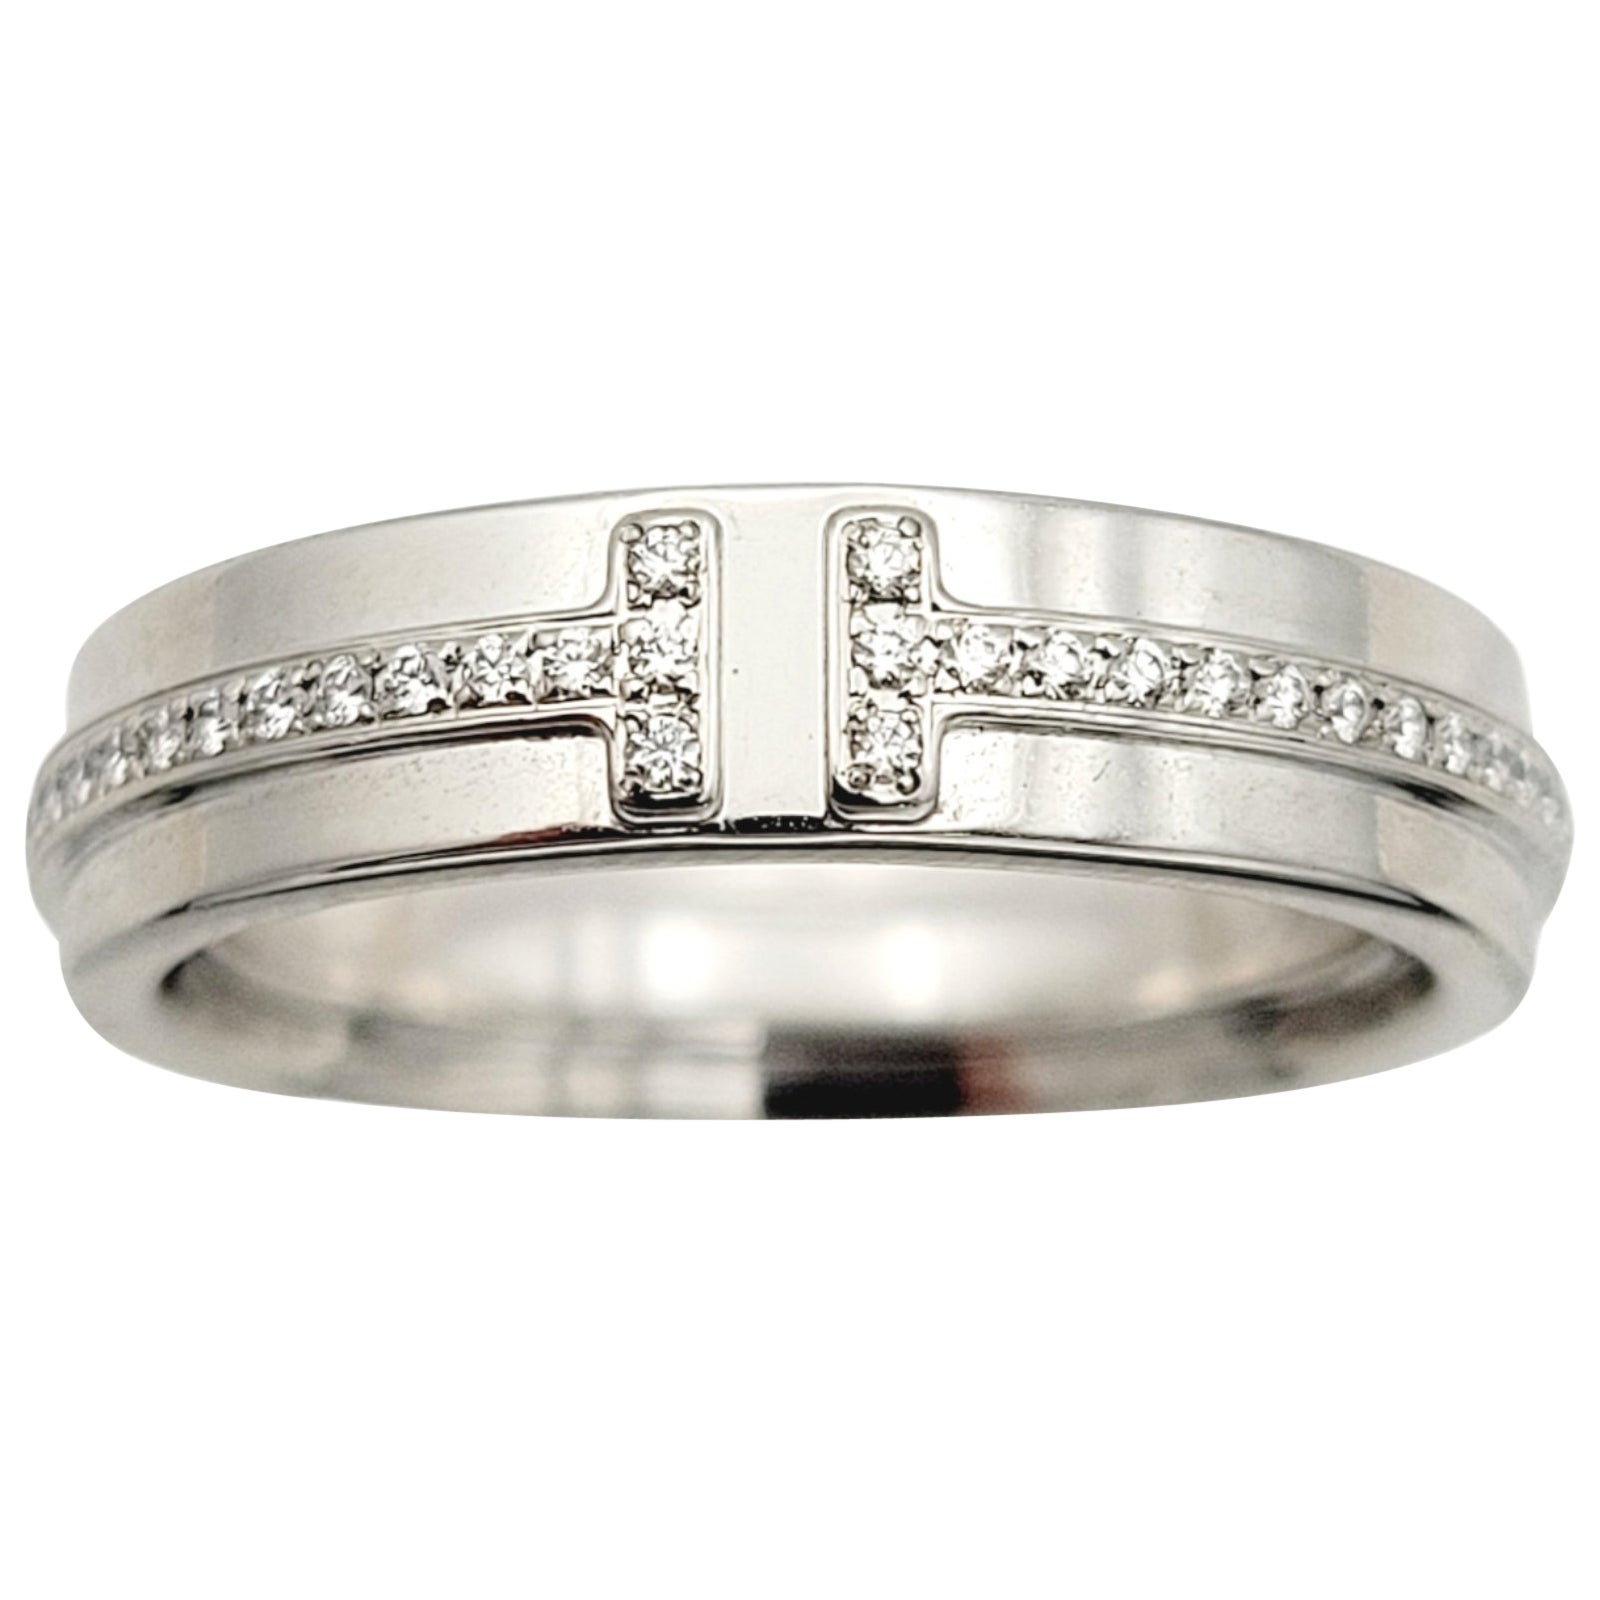 Tiffany & Co. Tiffany T Collection Narrow Diamond Ring in 18 Karat White Gold For Sale